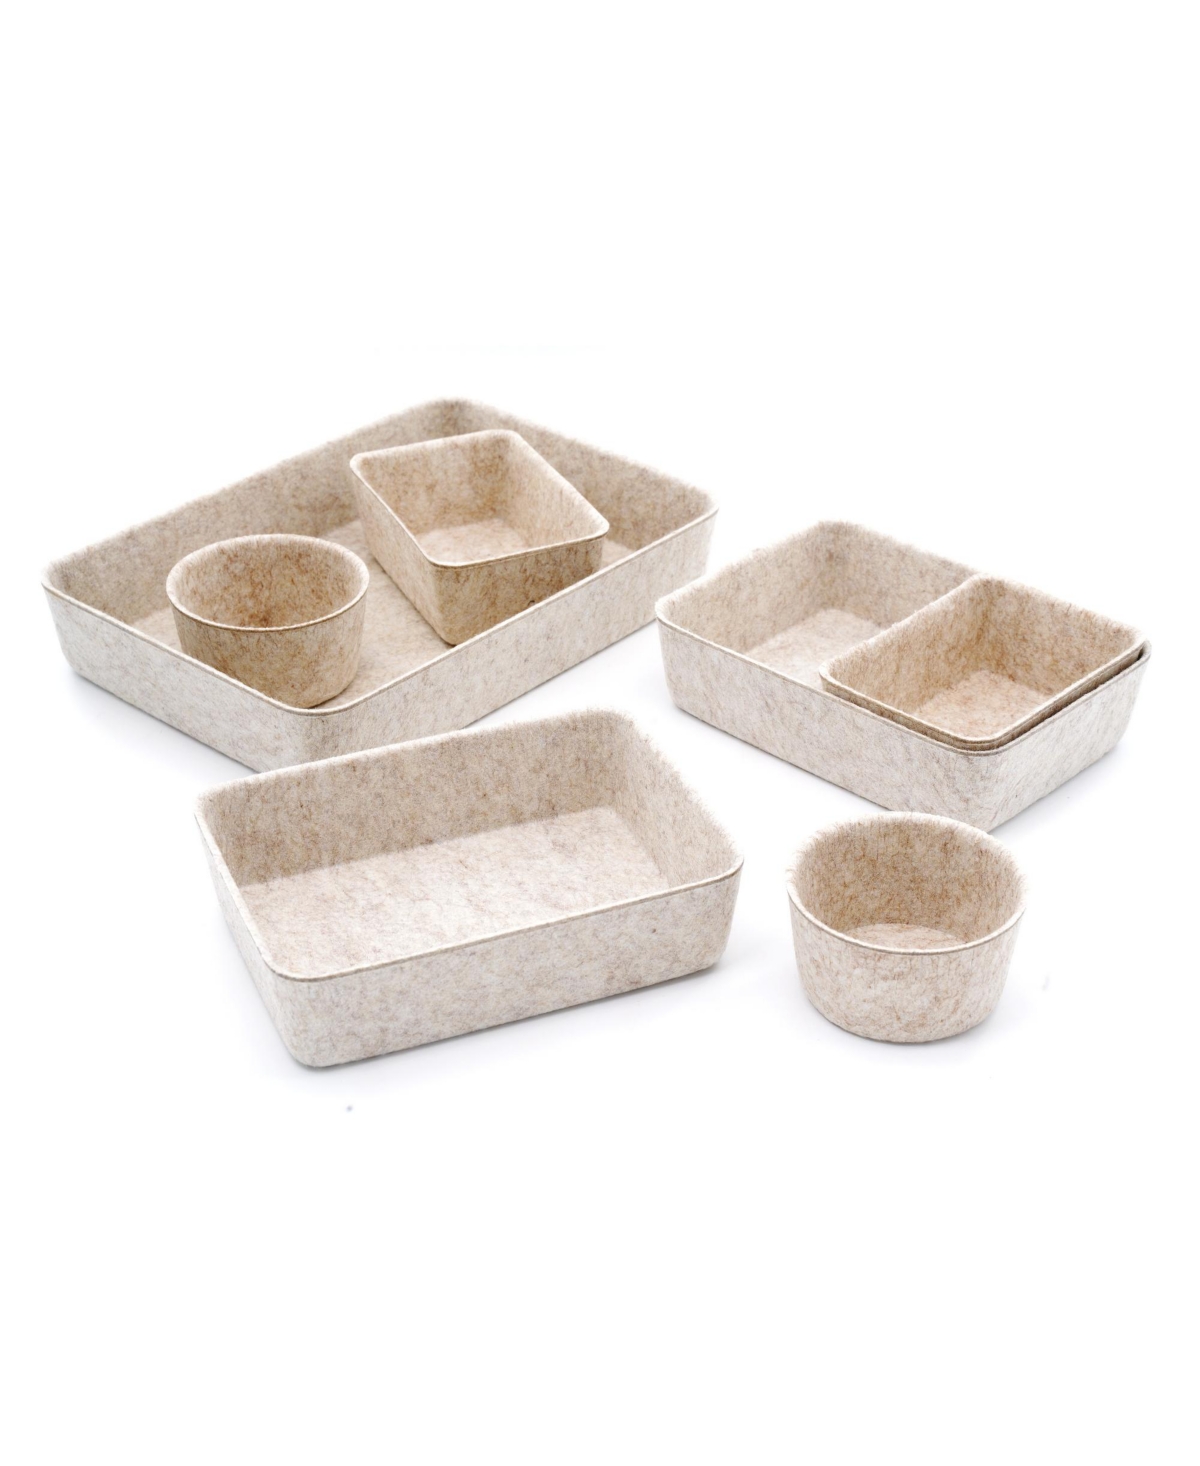 Shop Welaxy 7 Piece Felt Drawer Organizer Set With Round Cups And Trays In Oatmeal